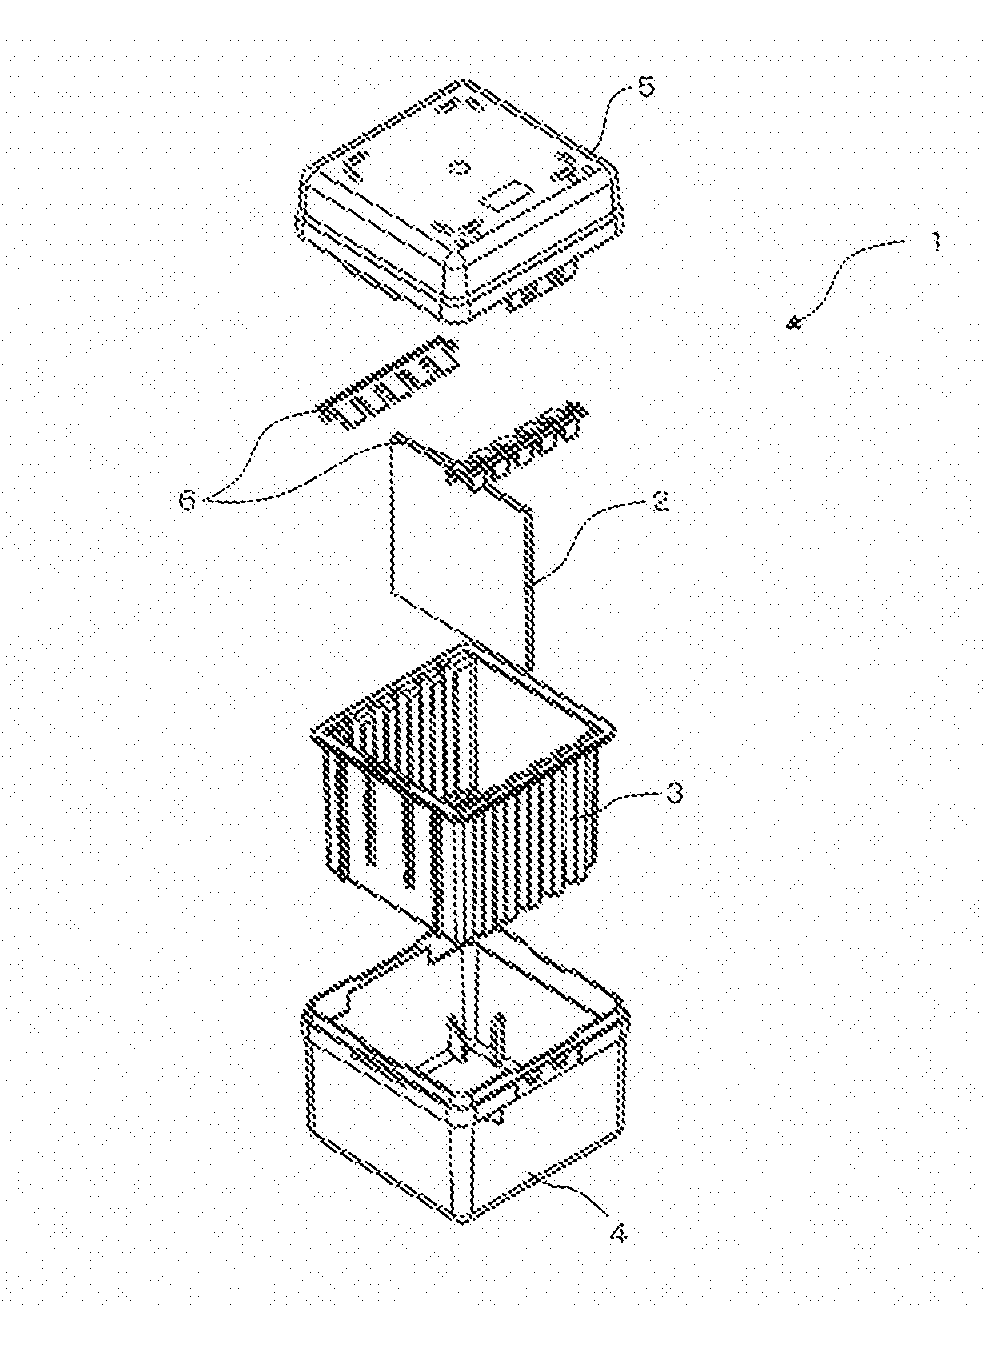 Container for storing photomask blanks